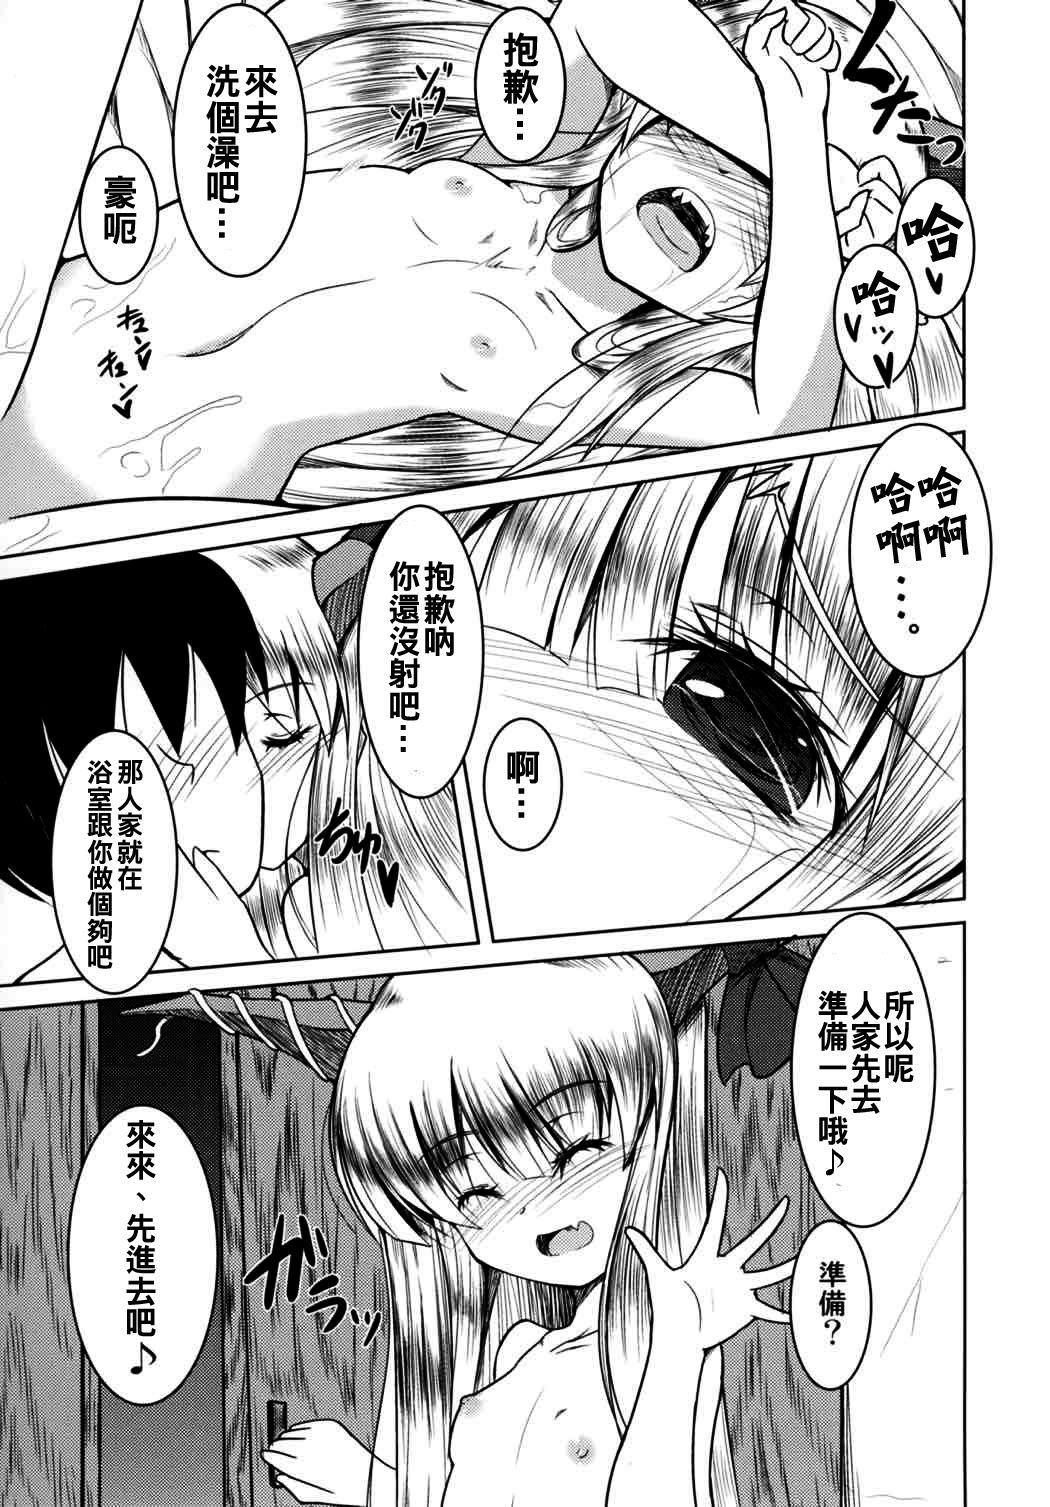 Grande Oniyome Love Love HaramaSex - Touhou project Gay Brokenboys - Page 11